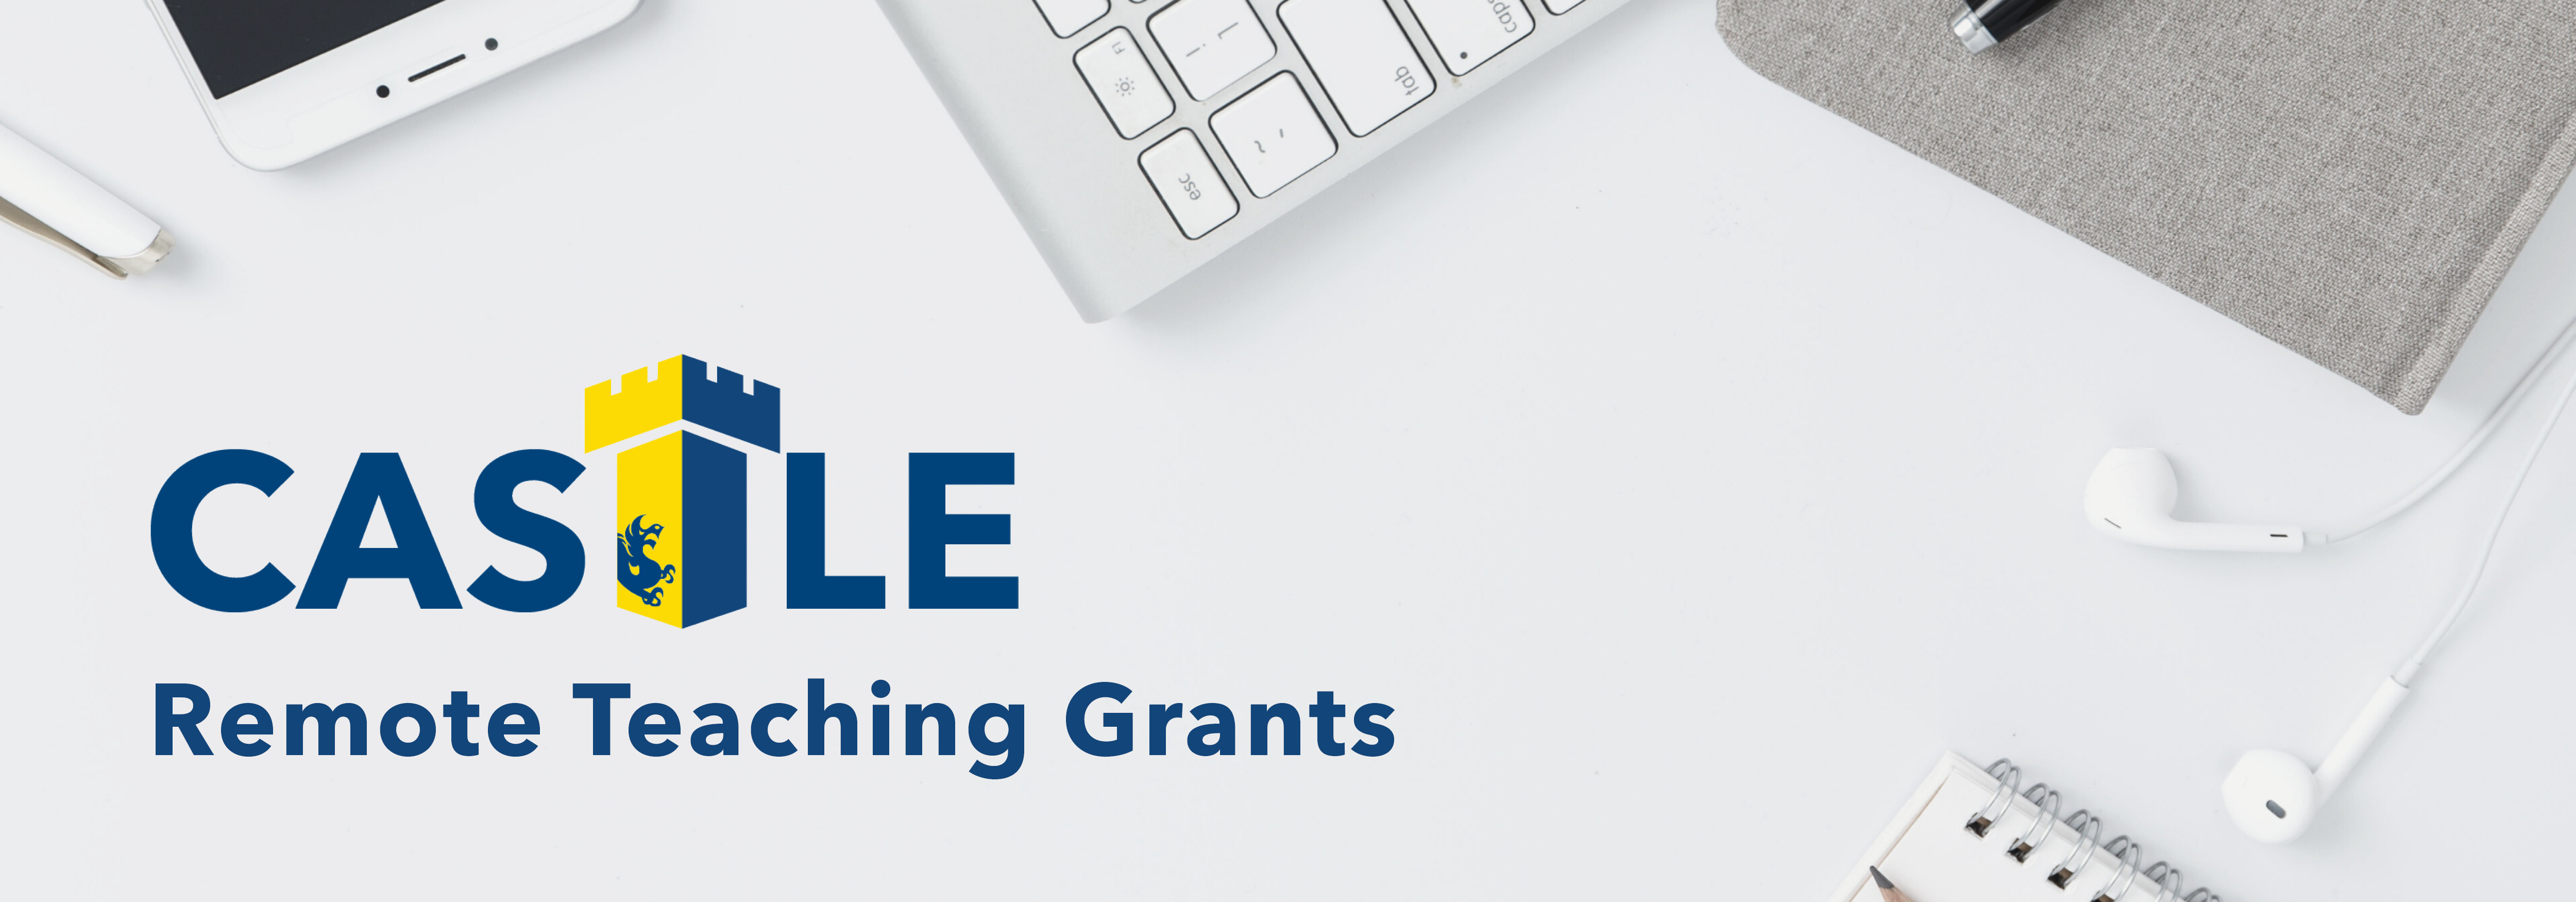 Remote Teaching Grant Banner